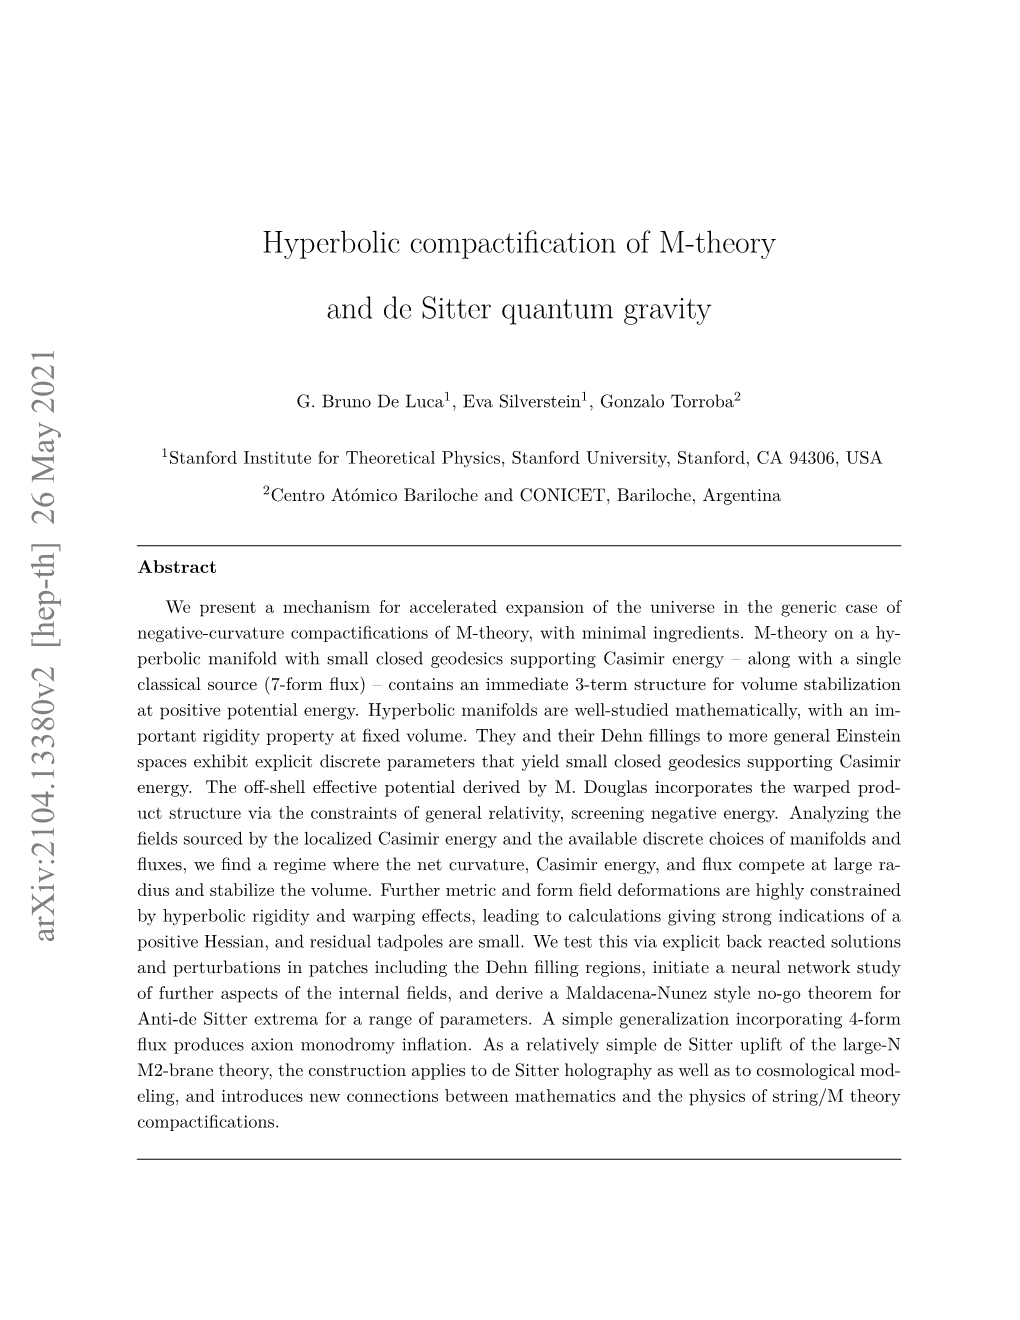 Hyperbolic Compactification of M-Theory and De Sitter Quantum